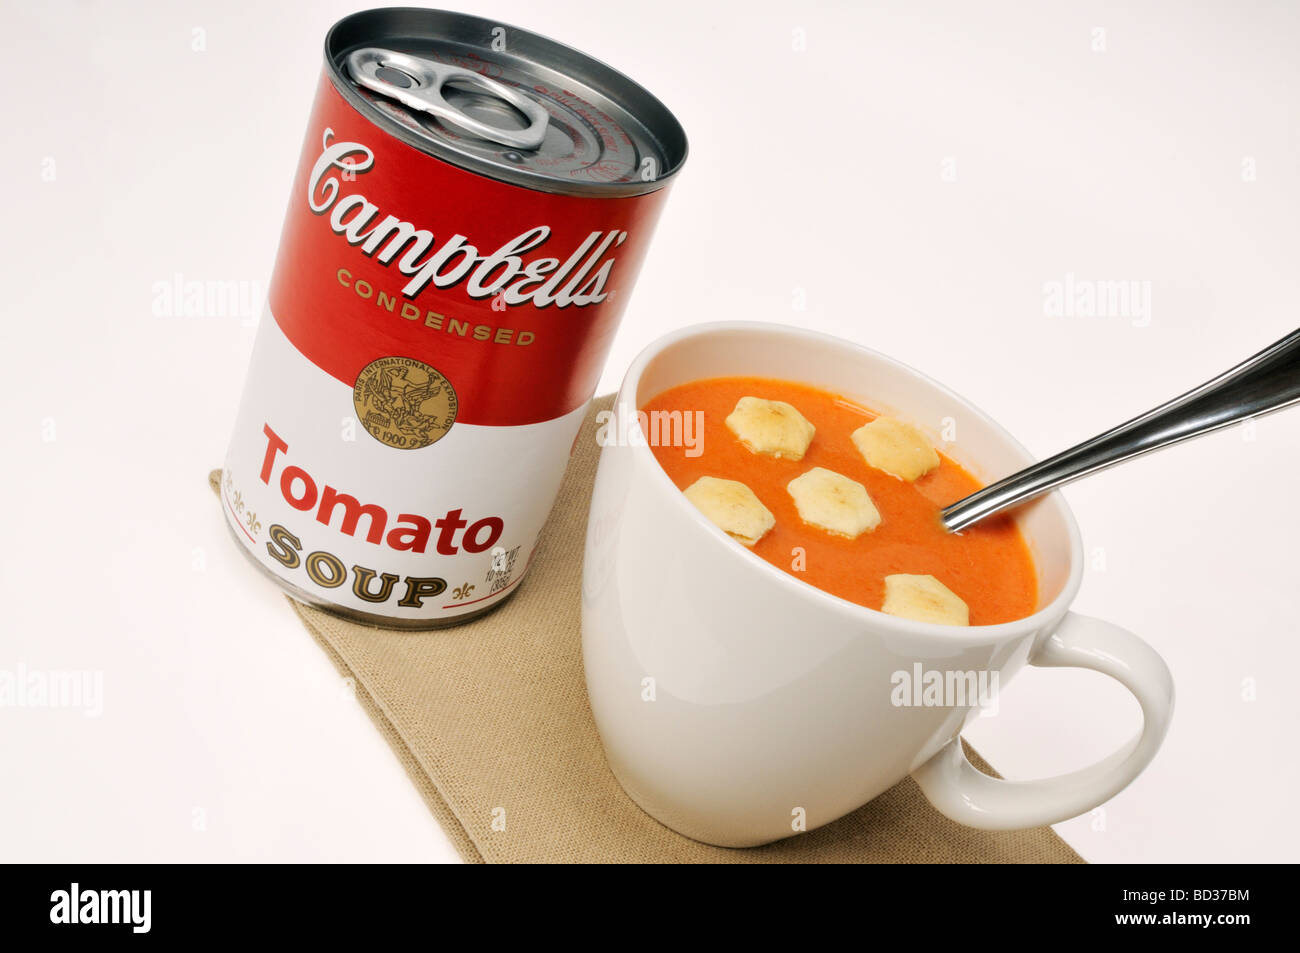 Campbell's tomato soup can with cup of soup and oyster crackers Stock Photo